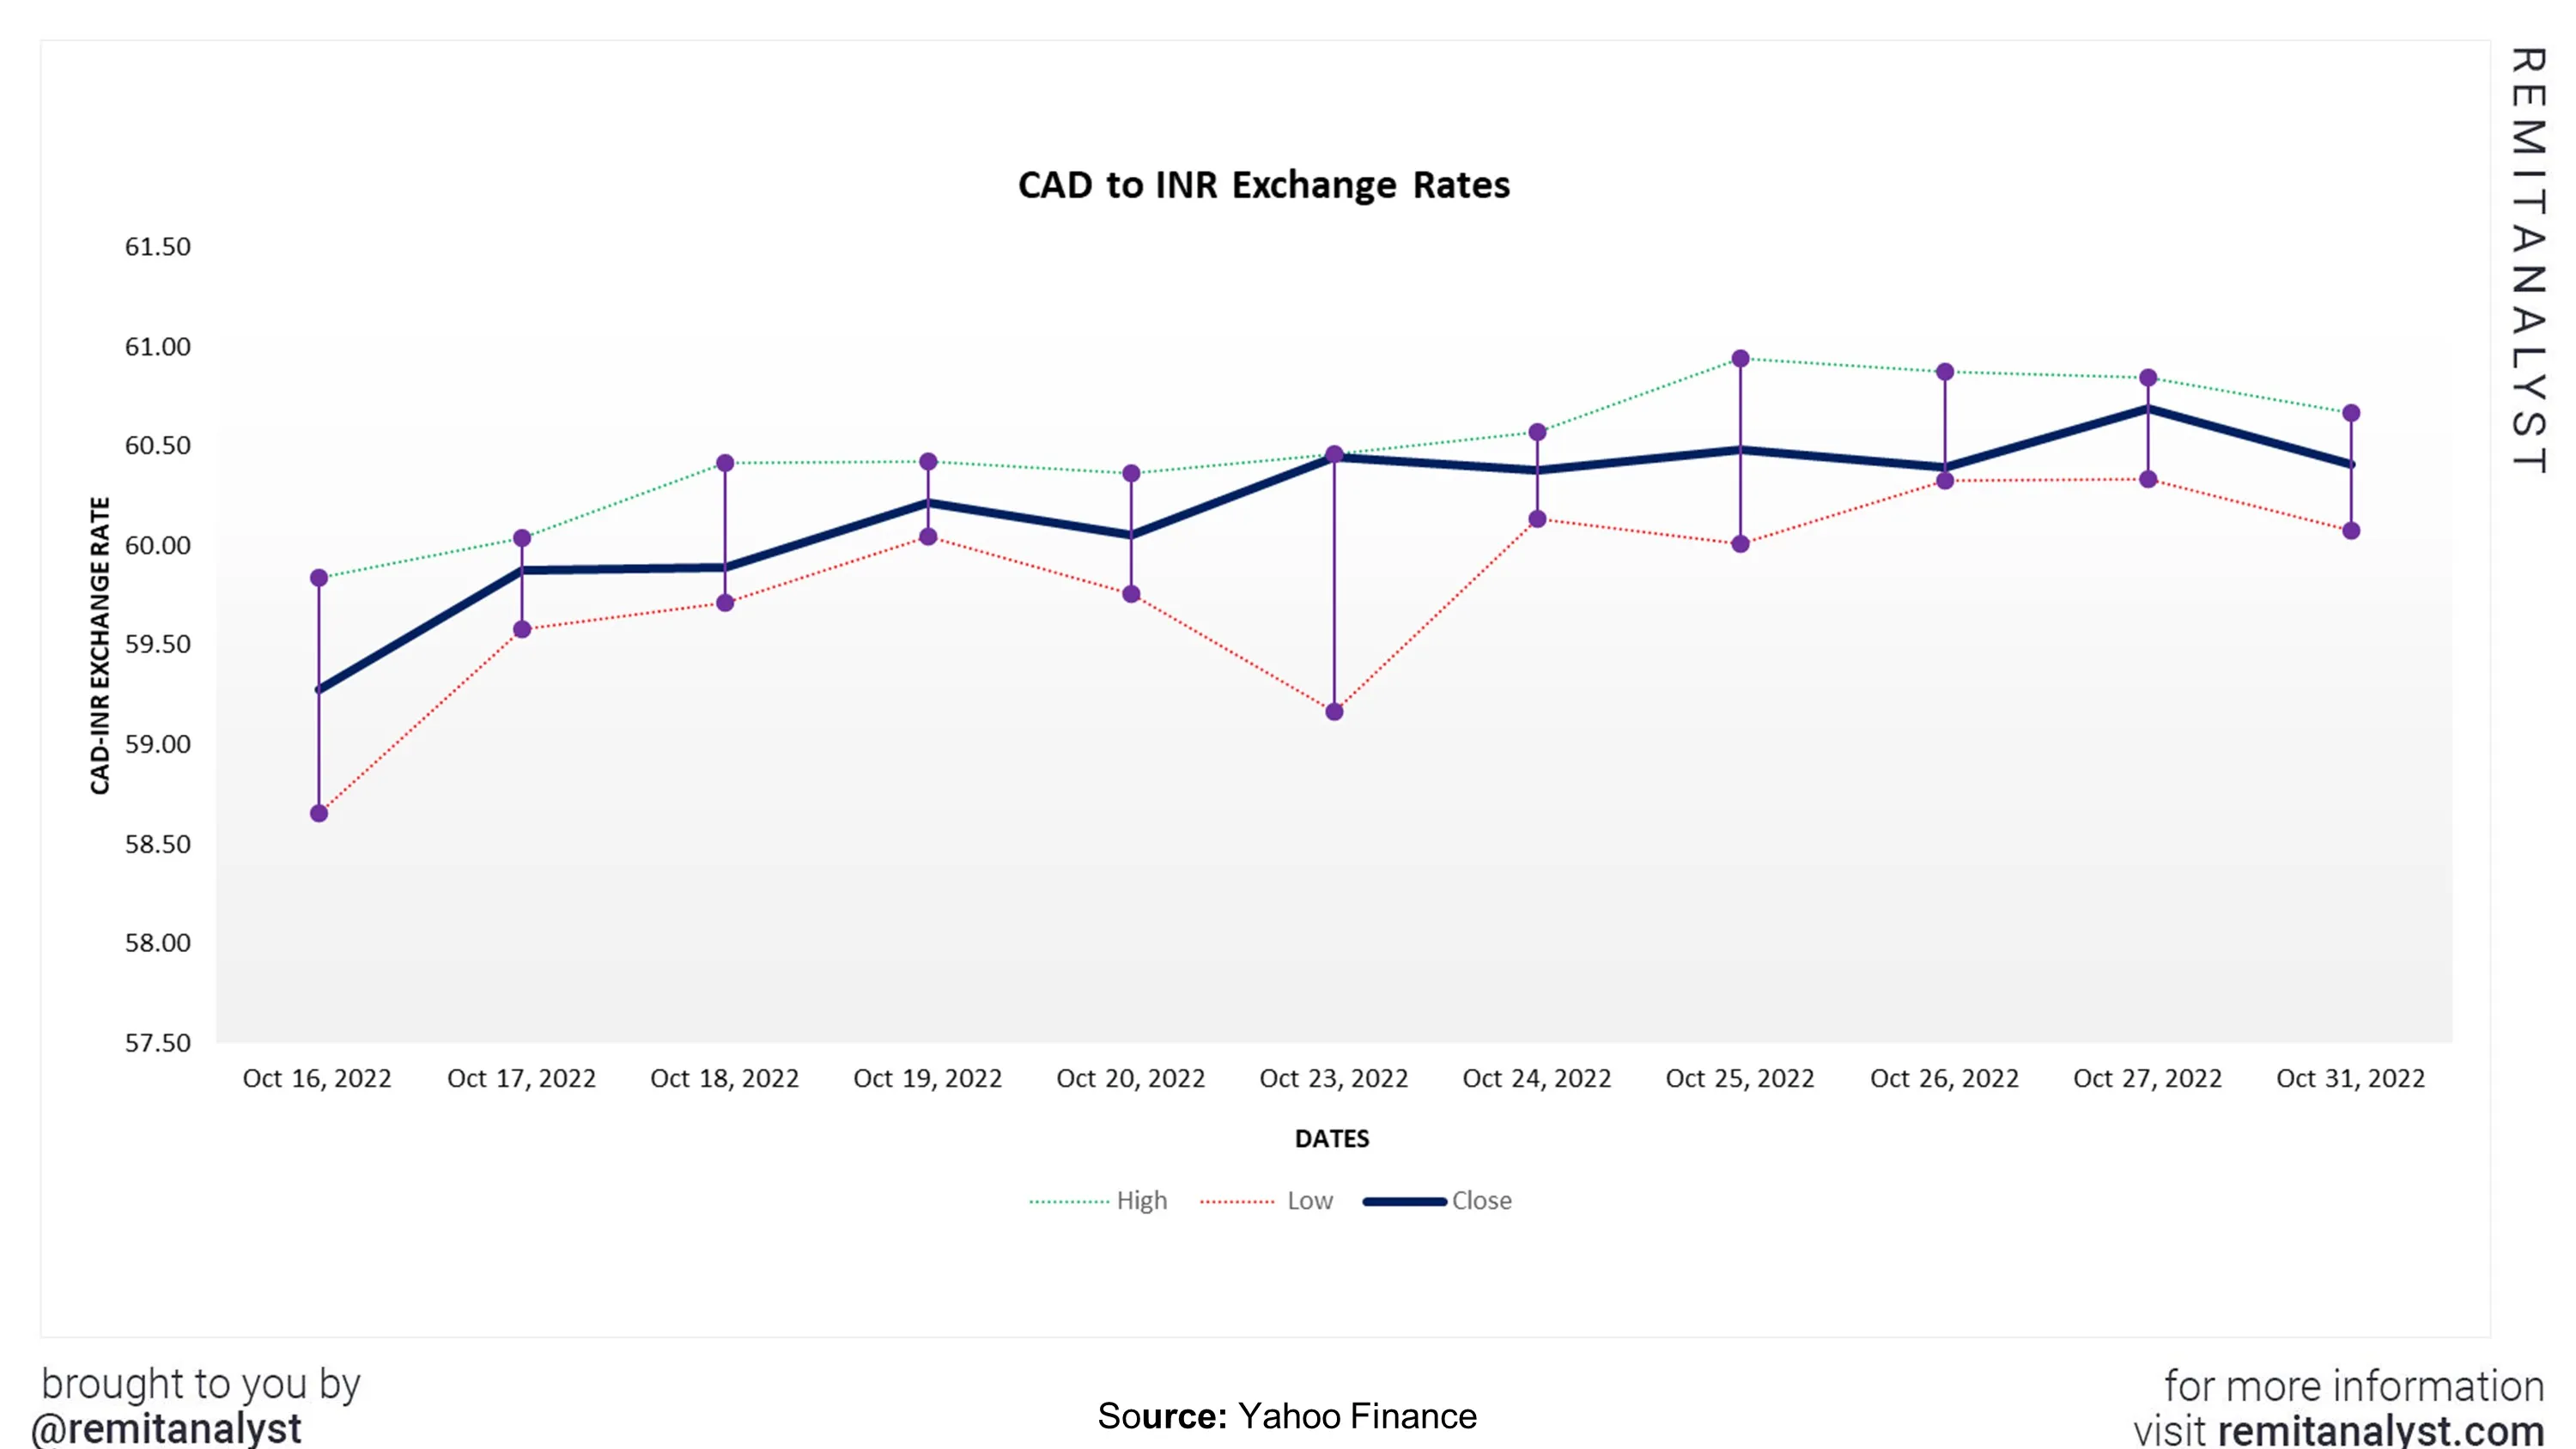 cad-to-inr-exchange-rate-from-16-oct-2022-to-31-oct-2022